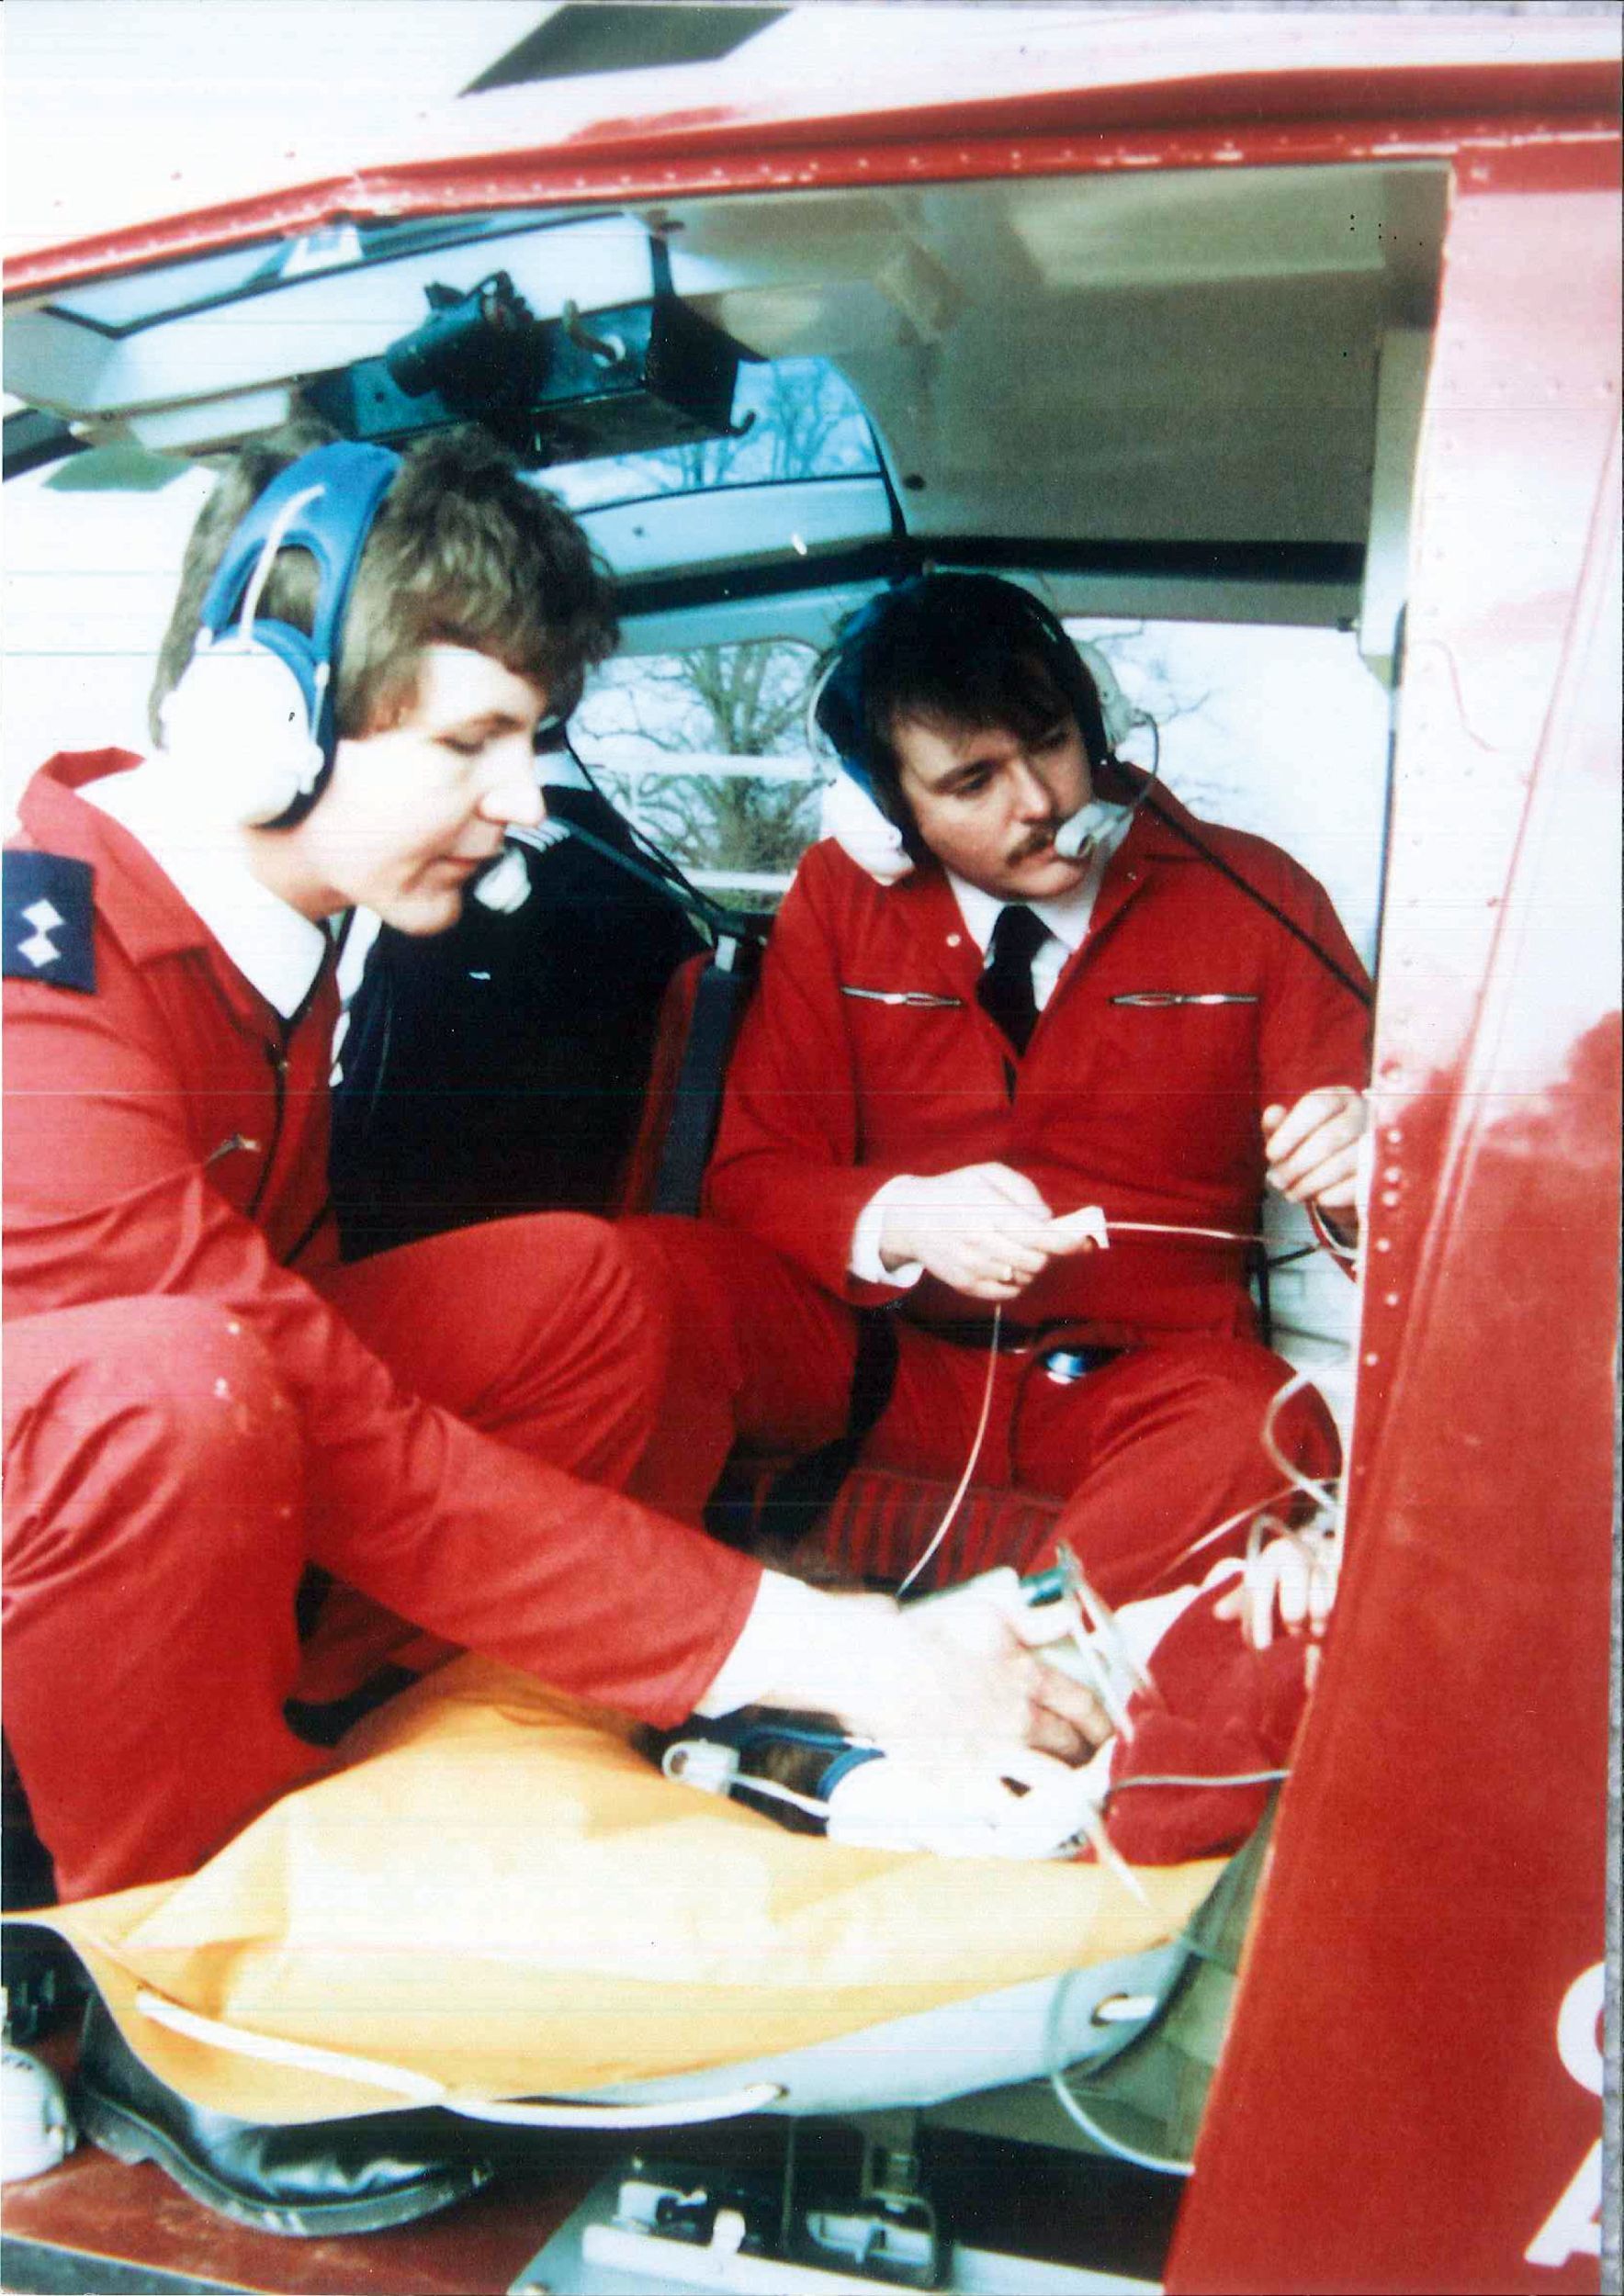 A rescue for the first Cornwall Air Ambulance